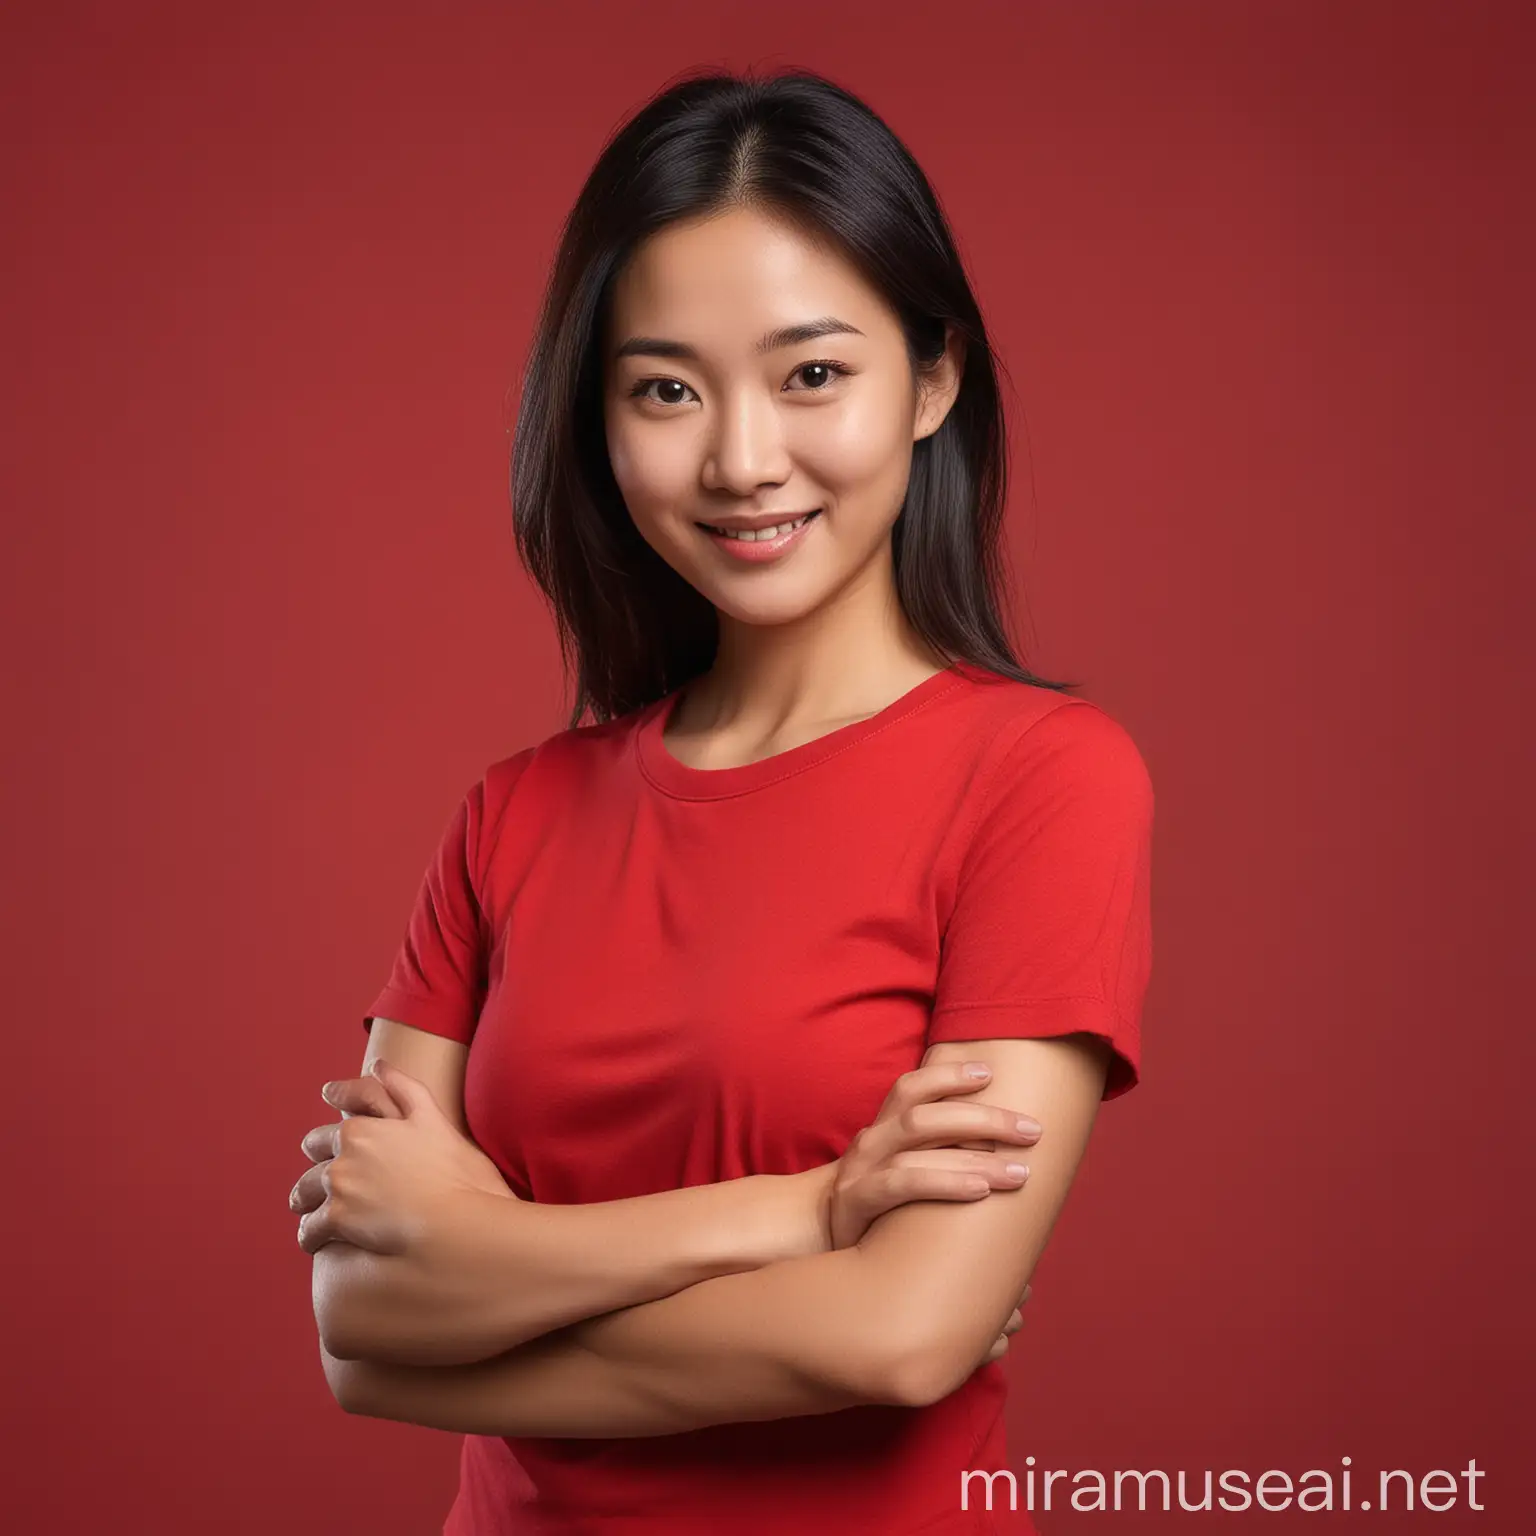 Generate a realistic picture from a women standing infrond of a red backgrond. there should be some soft shading behind the women. The women should be asian from 30 years old. wearing red shirt. She looks friendly with a small smile on her fase. 
